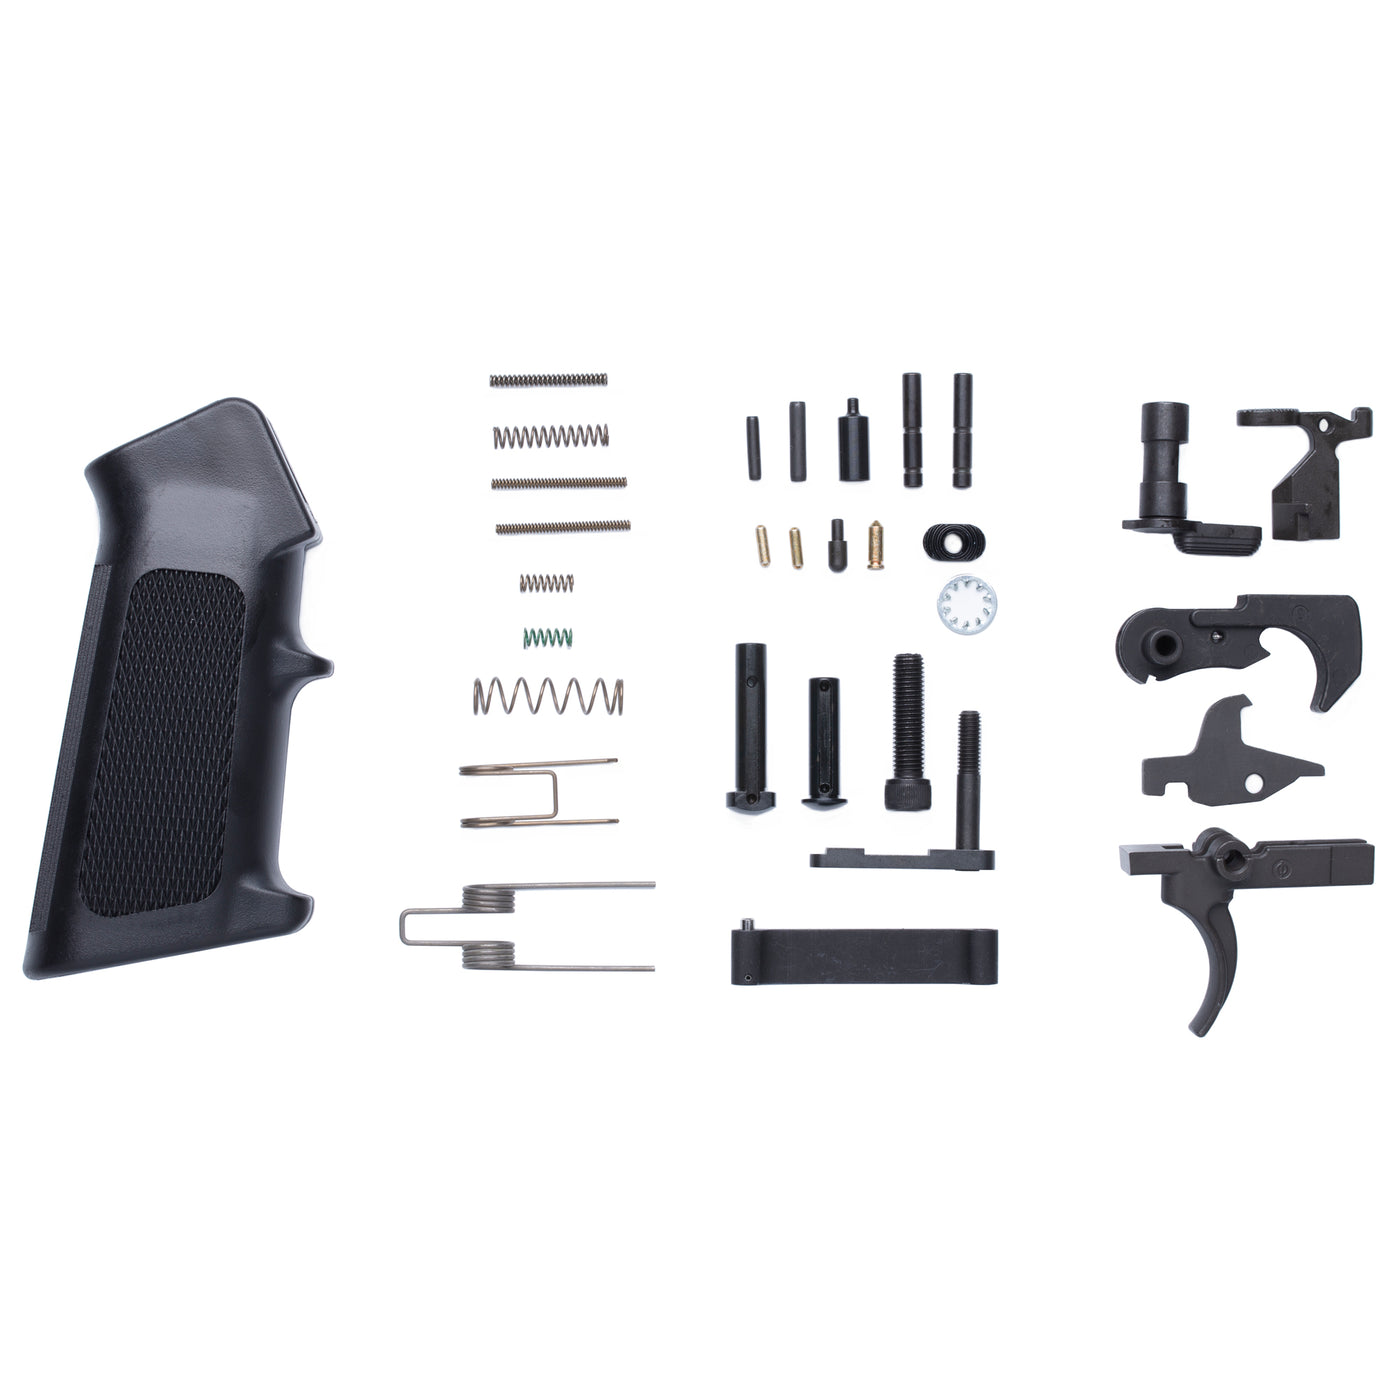 Cmmg Lower Parts Kit For Ar-15 -